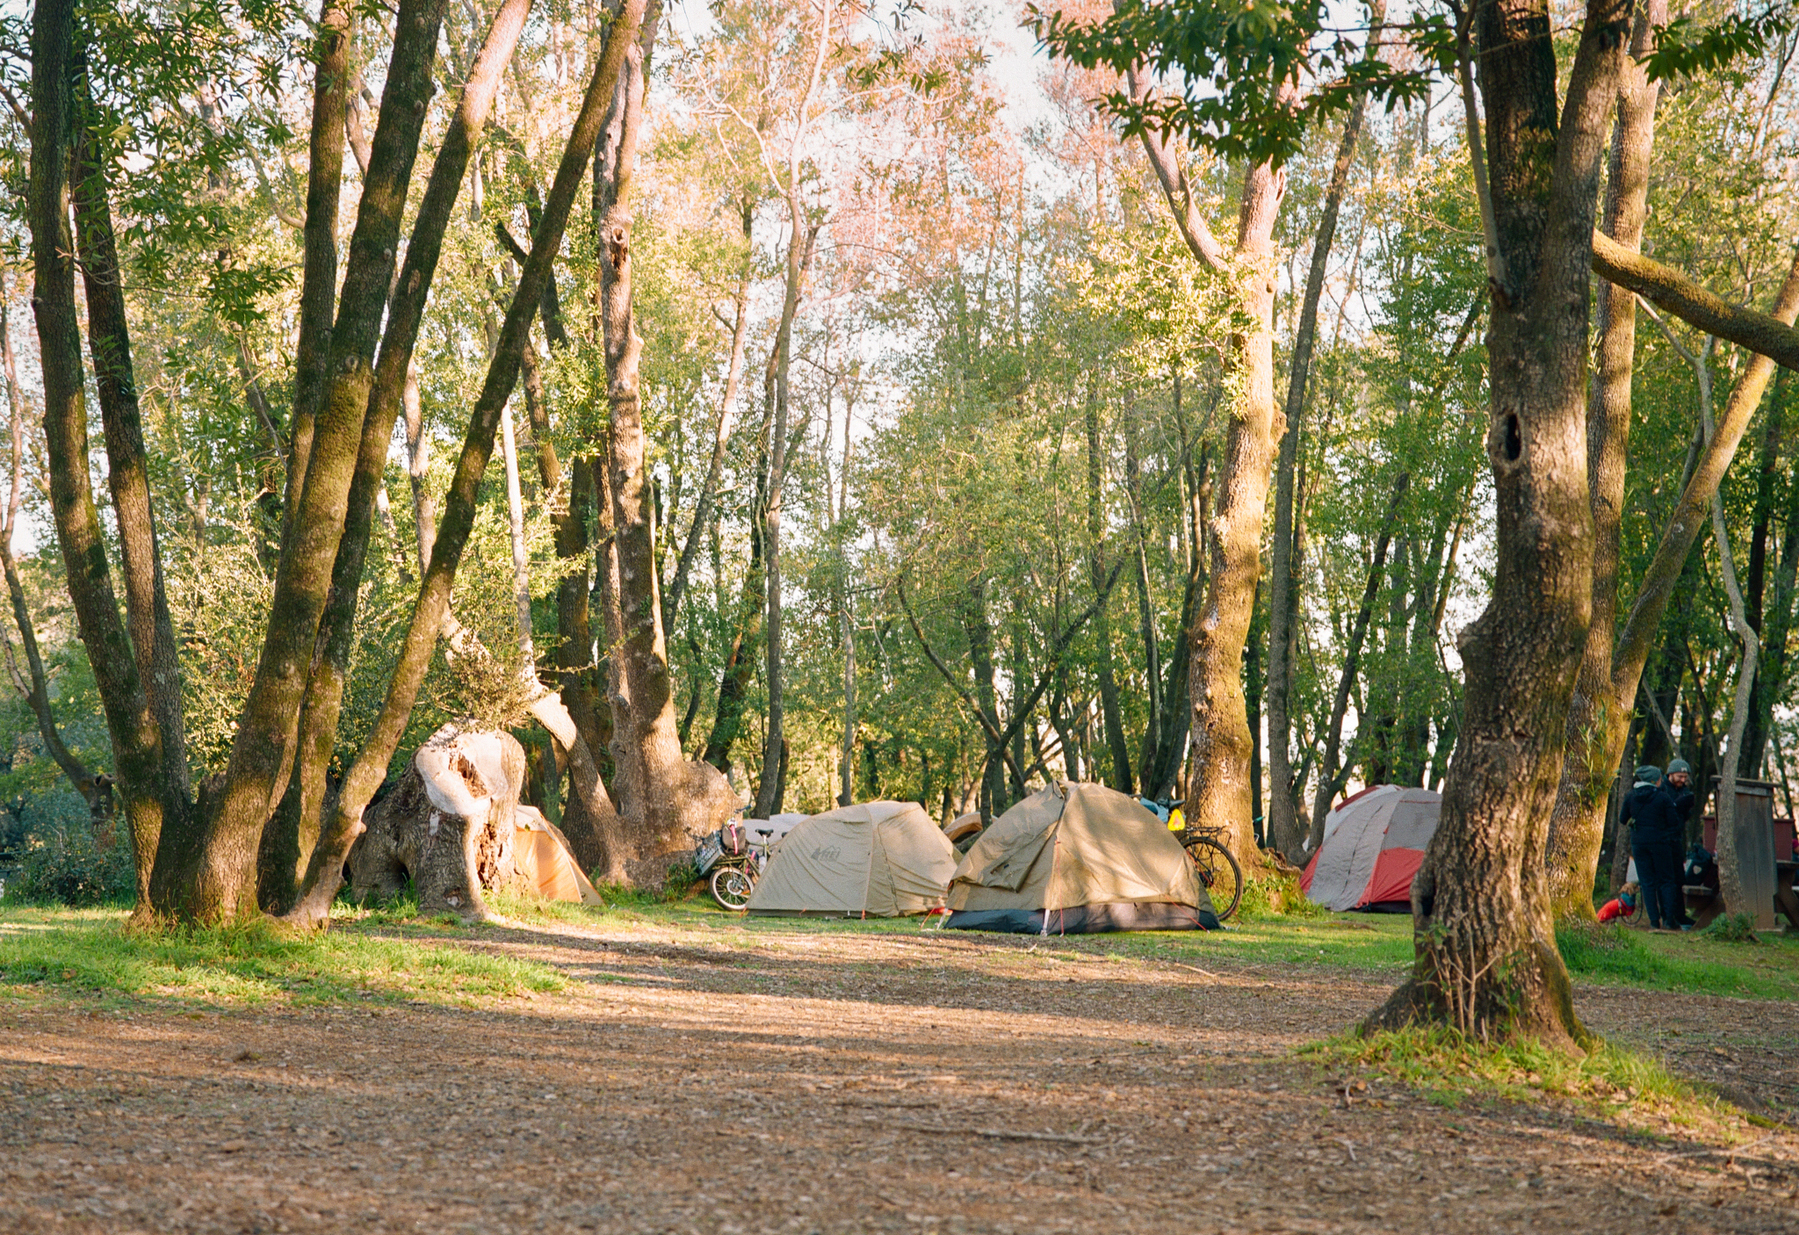 a scan of a medium format photograph of some tents and bicycles in the woods